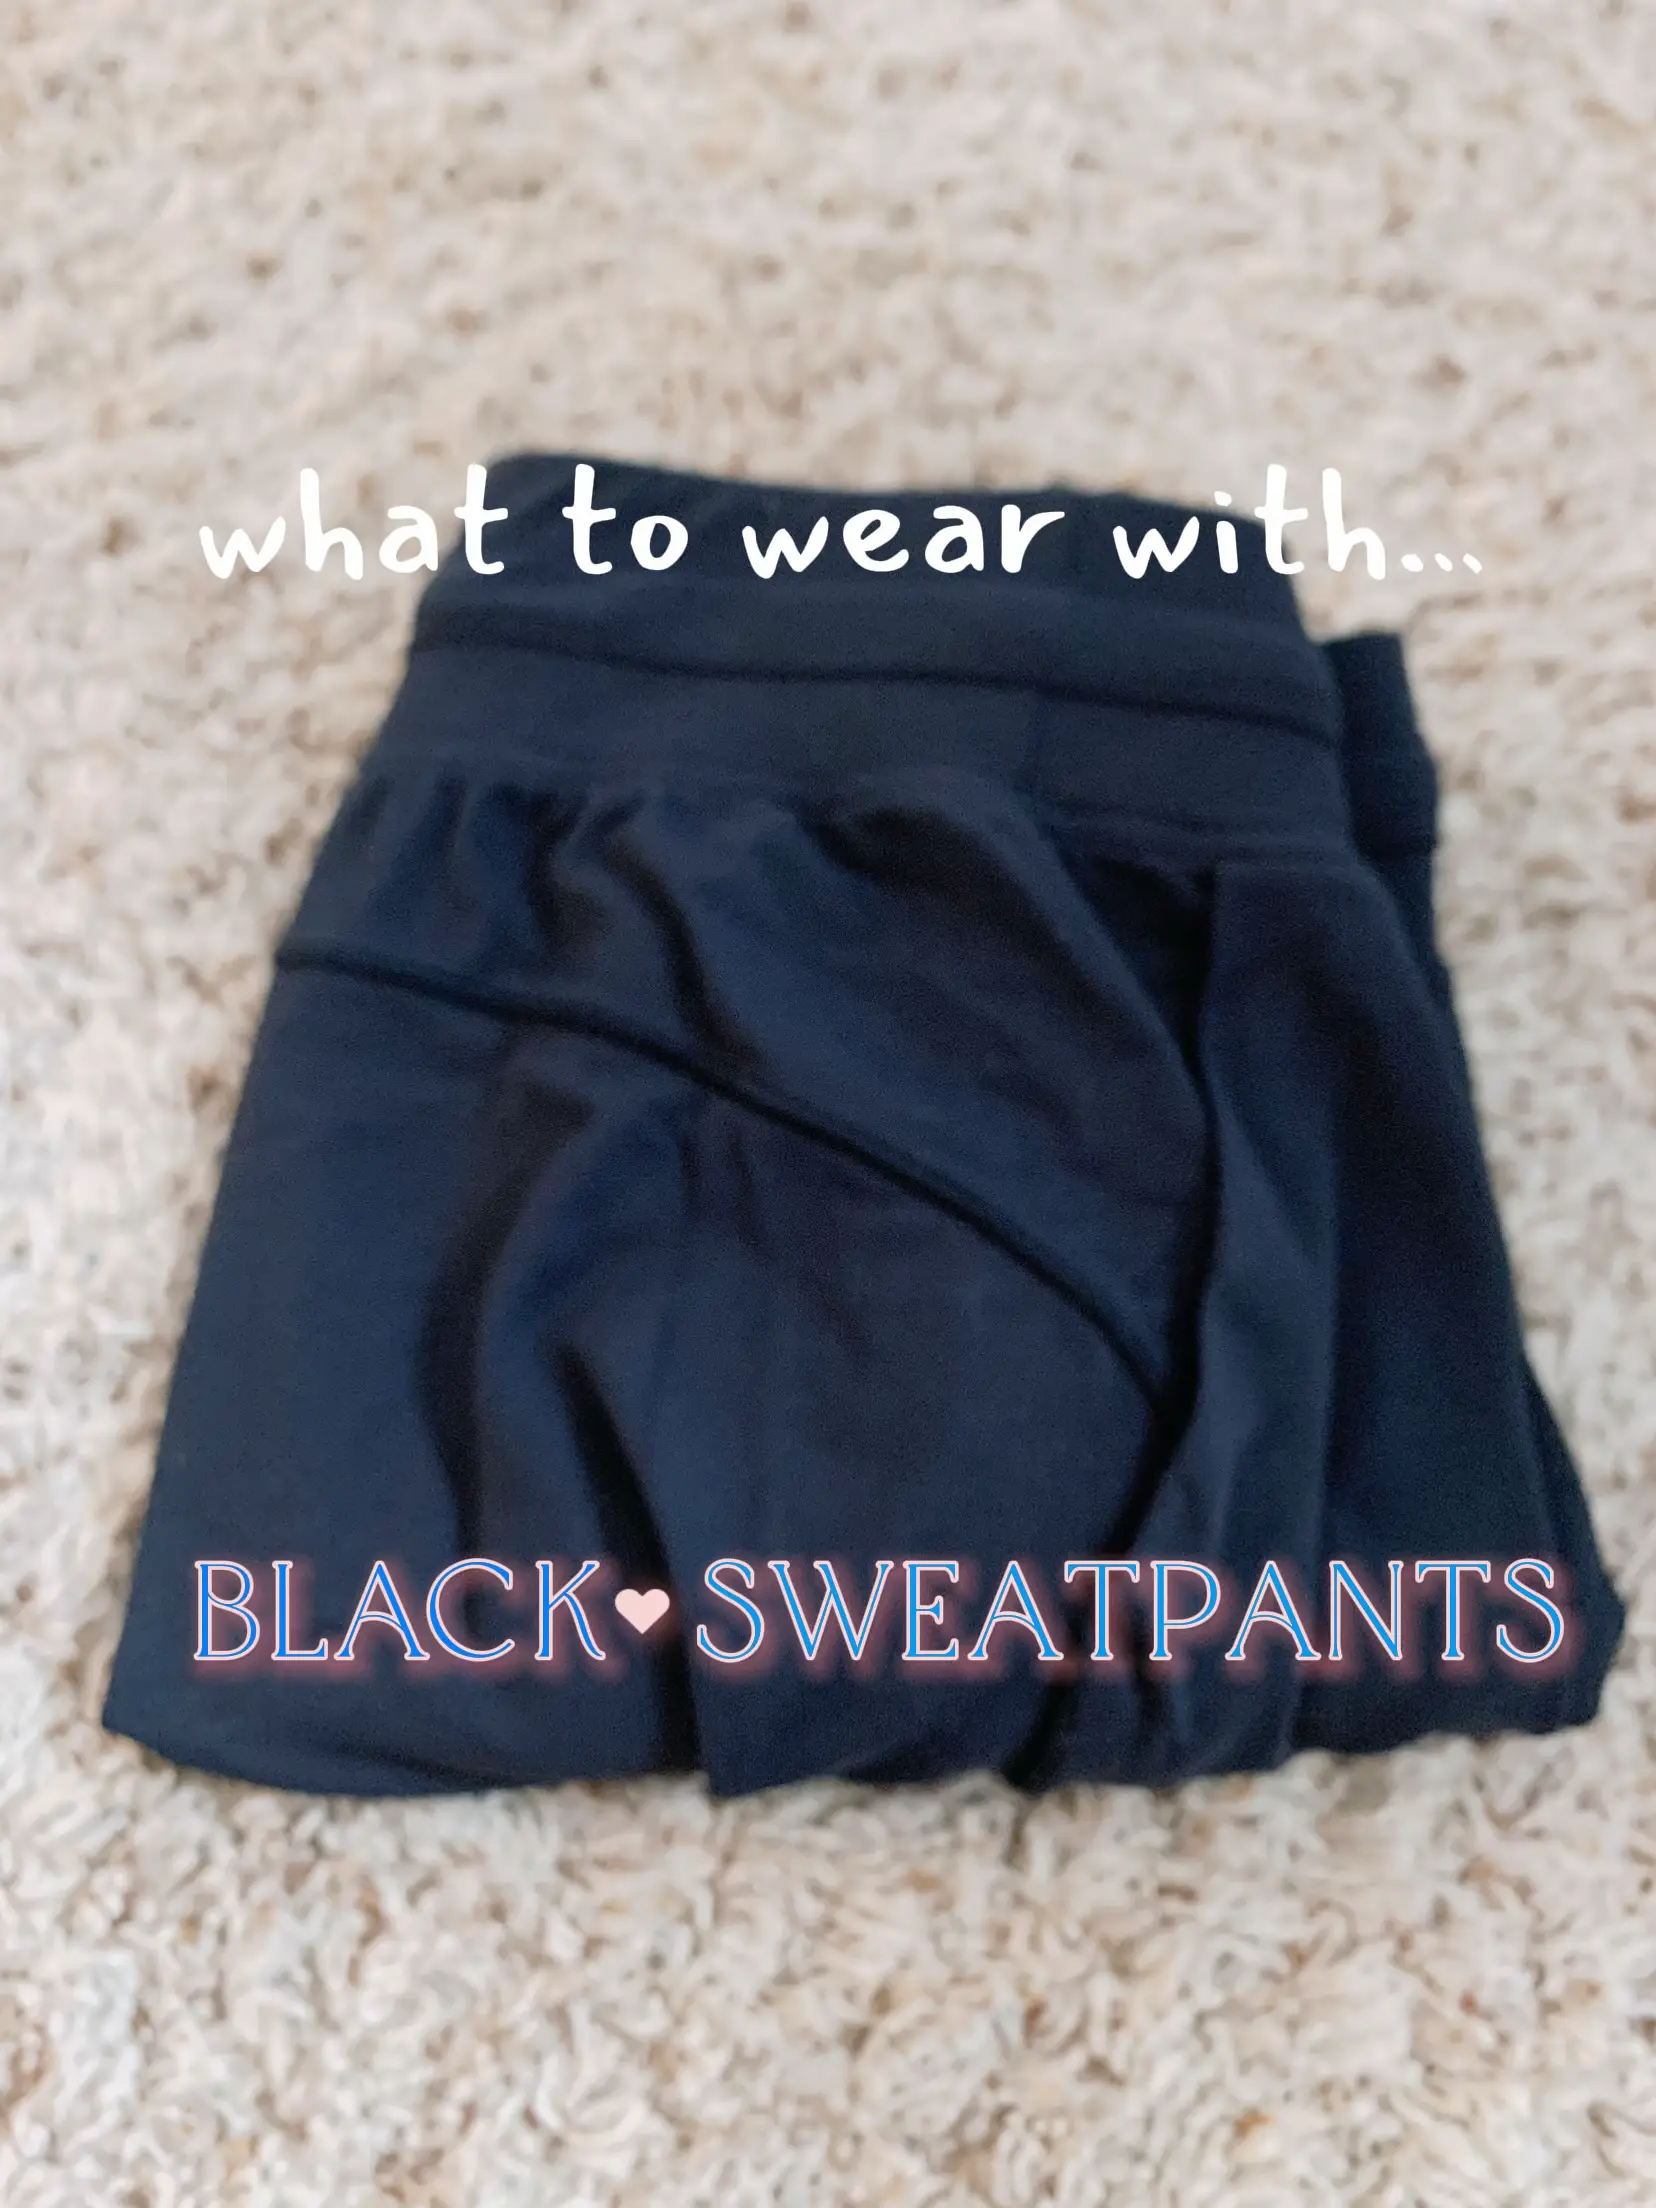 Ways to dress up a sweatpants look, Gallery posted by Tianakori